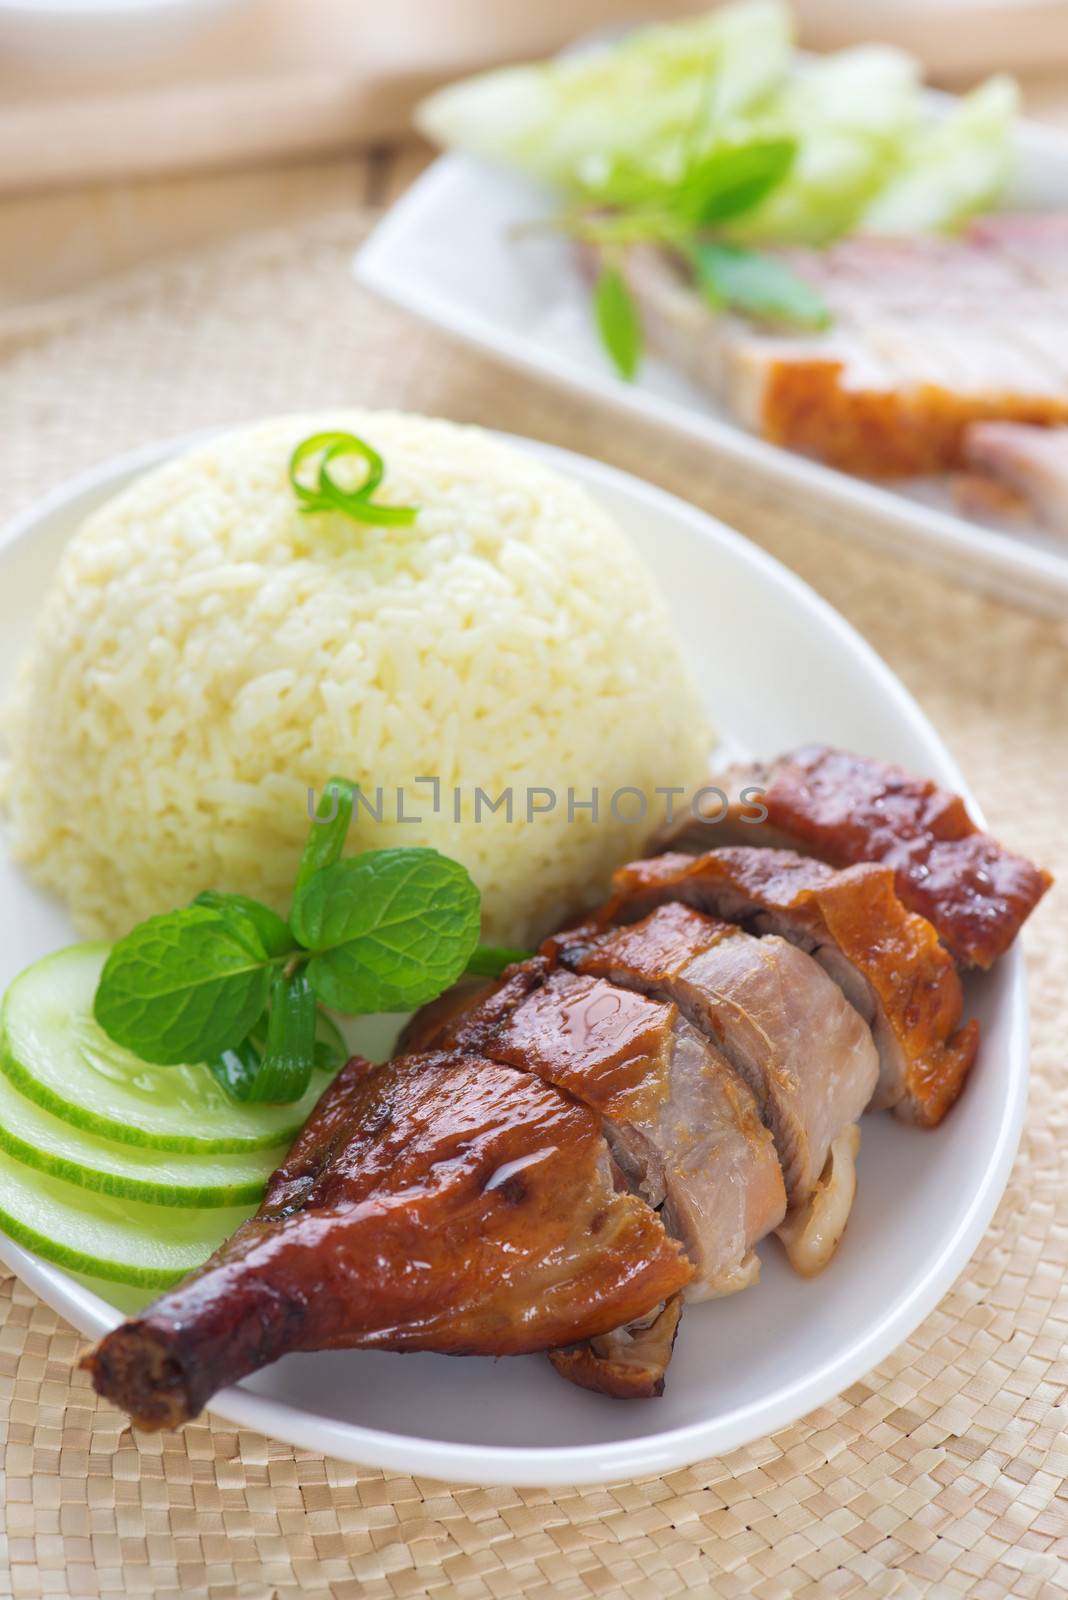 Roasted duck and roasted pork crispy siu yuk, Chinese style, served with steamed rice on dining table. Singapore cuisine.